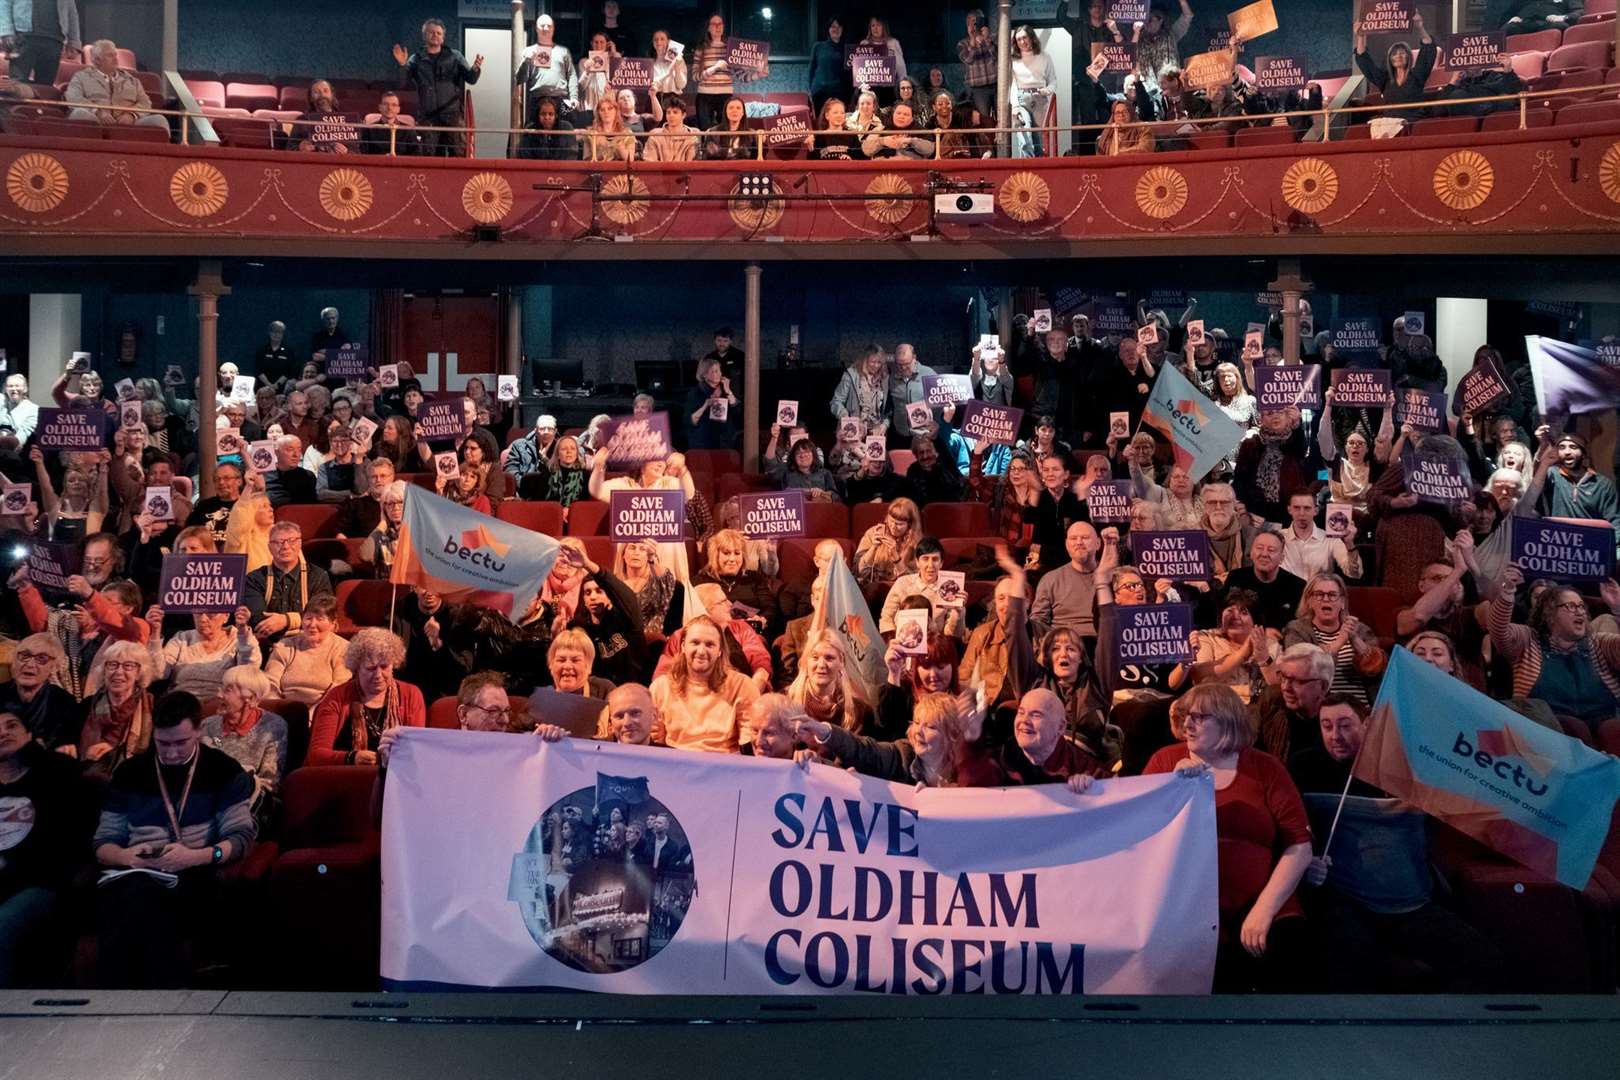 A public meeting during the effort to save Oldham Coliseum (PA)